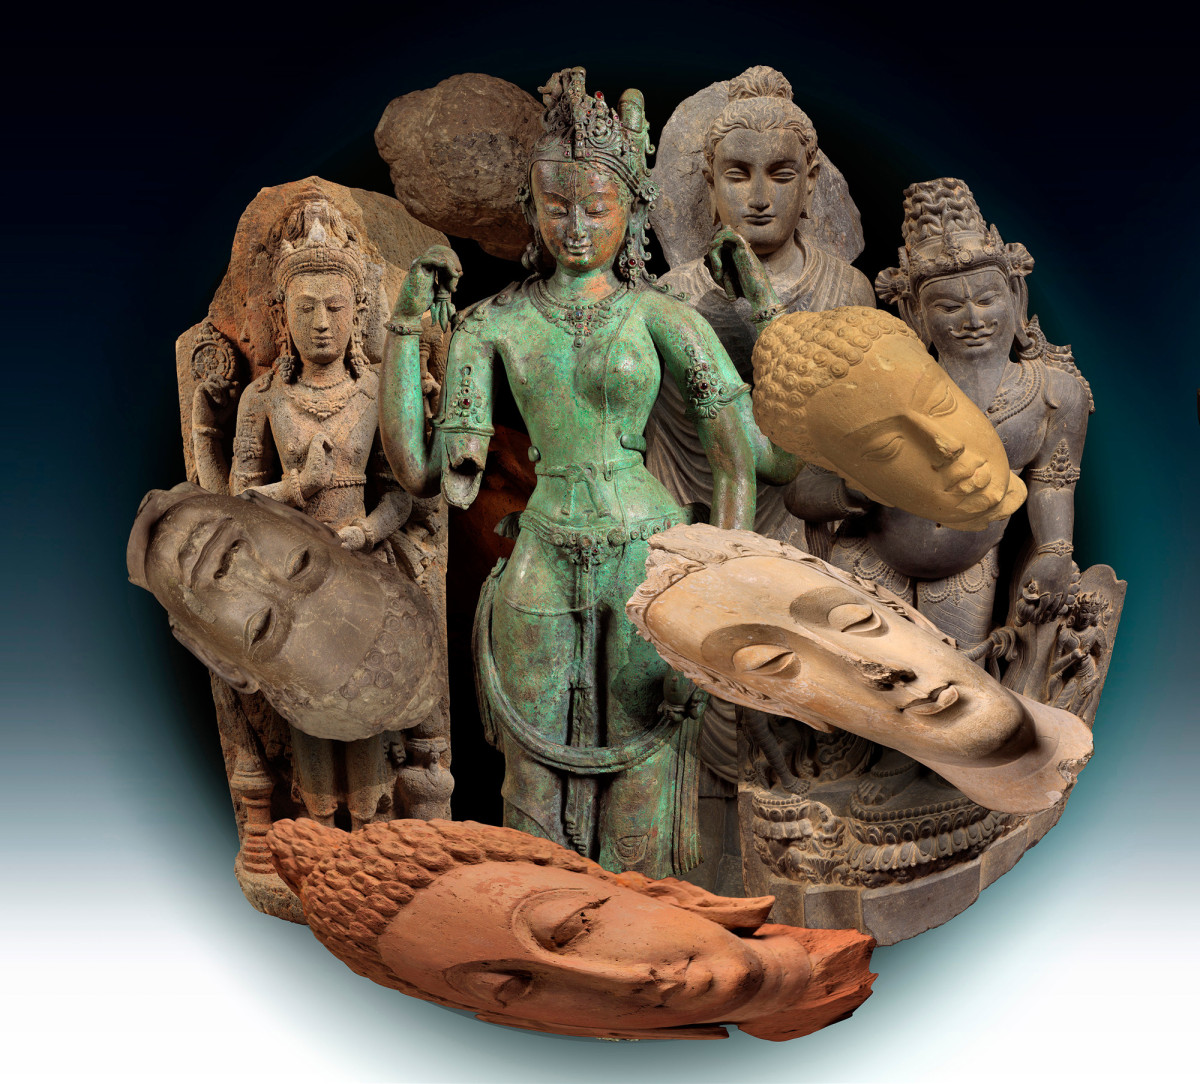 Ken Gonzales-Day Transformation: (left) Nepal, The Androgynous Form of Shiva and Parvati, (Ardhanarishvara); surrounded by, India, Head of Buddha Shakyamuni; Cambodia, Head of Buddha Shakyamuni; Indonesia, Brahma, the God of Creation; Pakistan, Buddha Shakyamuni; India, The Maharishi; India, Head of Buddha Shakyamuni; (center) Egypt, Figurine of the Goddess Bastet as a Cat, Royal Head, Nubian Female Figure, Statuette of Osiris, Foot, Baboon, Head of Osiris, Kneeling Priest Figurine in Worshipping Pose; (right) Japanese, Eleven-headed Kannon, Buddhist Layman, Melanesian with Drum, Amida Buddha; Unjudō Shumemaru, The Zen Priest Bukan; Japan, Monkey with Mermaid swimming to the Dragon King&rsquo;s Palace (all LACMA), 2019Auguste Rodin, Left Hand of a Pianist (LACMA)&nbsp;,&nbsp;2019